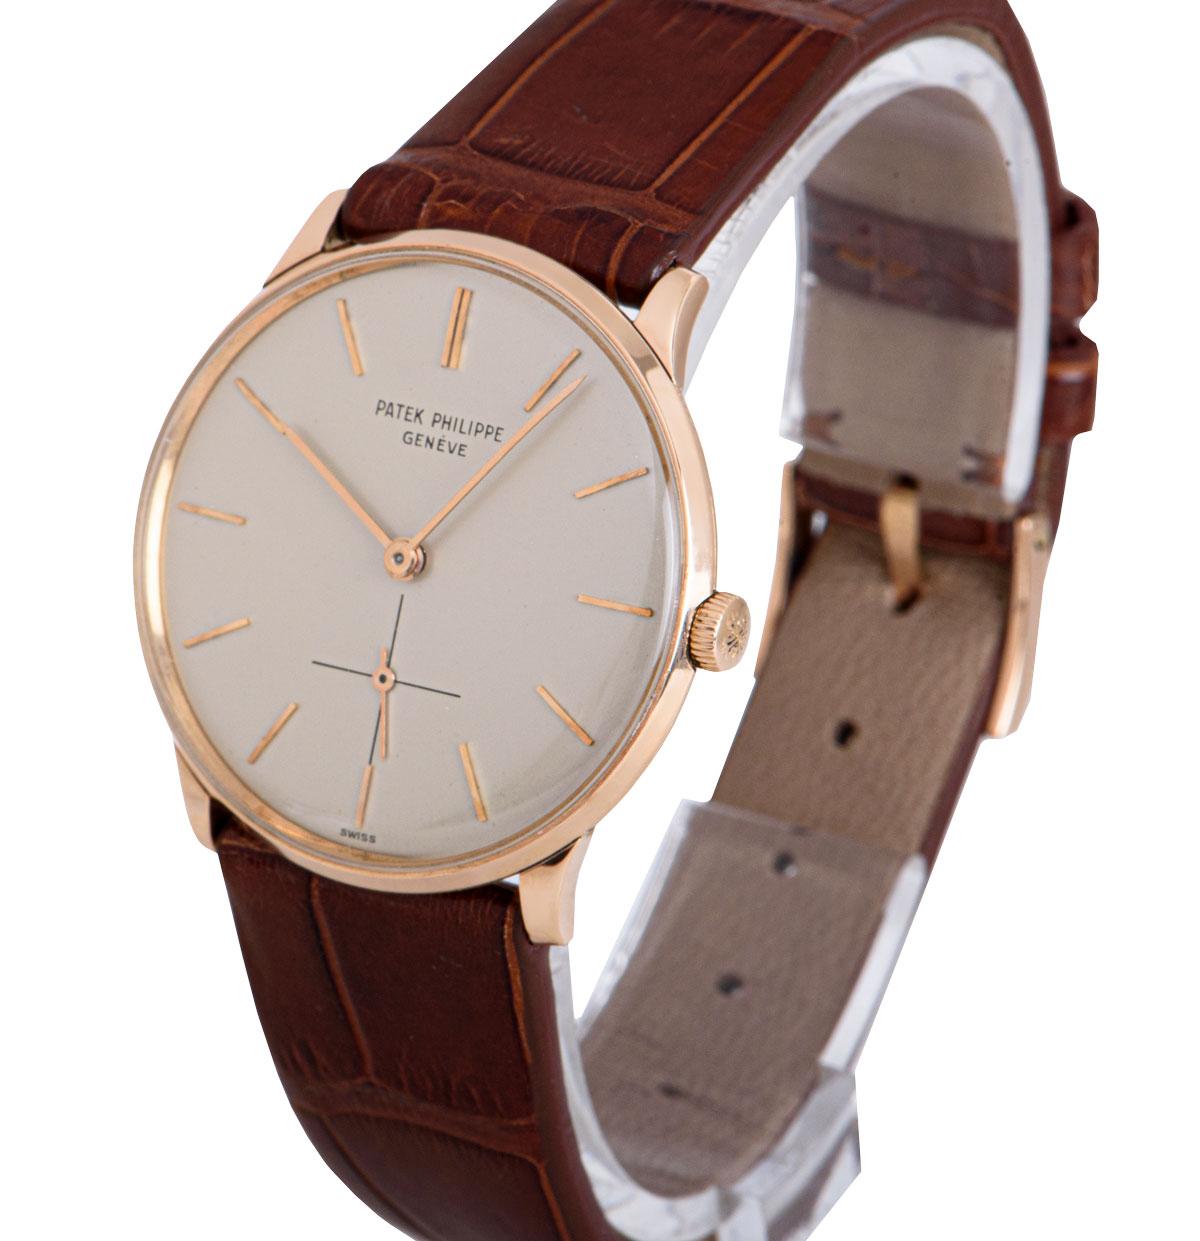 A 33 mm 18k Rose Gold Calatrava Vintage Gents Wristwatch, silver dial with applied hour markers, a fixed 18k rose gold bezel, a brown leather strap (not by Patek Philippe) with an original 18k rose gold pin buckle, plastic glass, manual wind